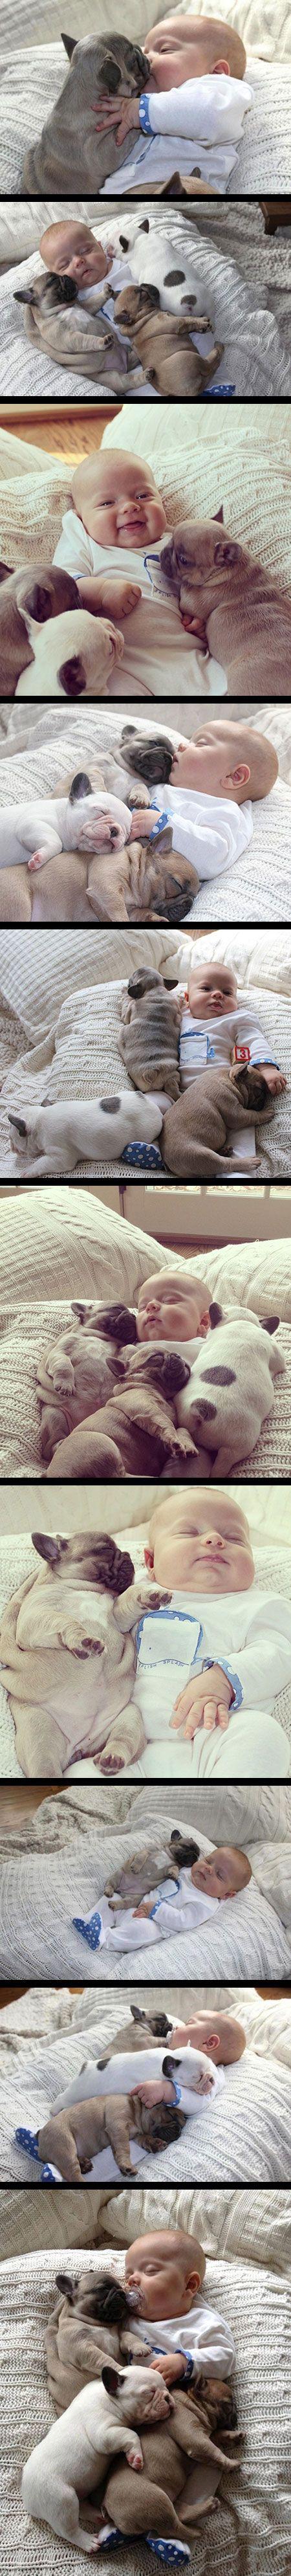 I defy you to find a cuter image of a baby and a dog